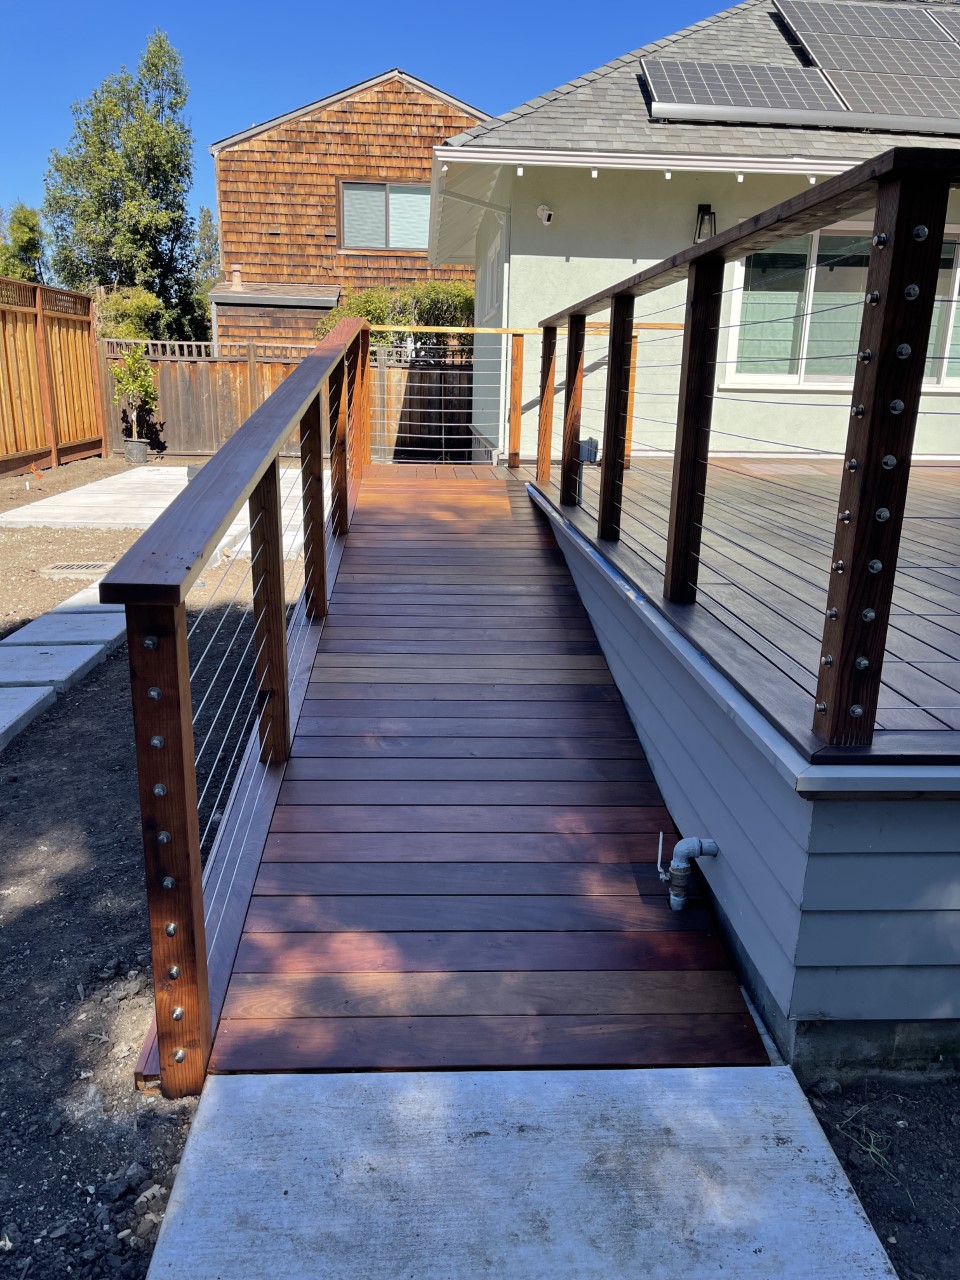 Custom ramp built for outdoor kitchen and BBQ area by Jack Cannon General Contractor with Lynstar Enterprises